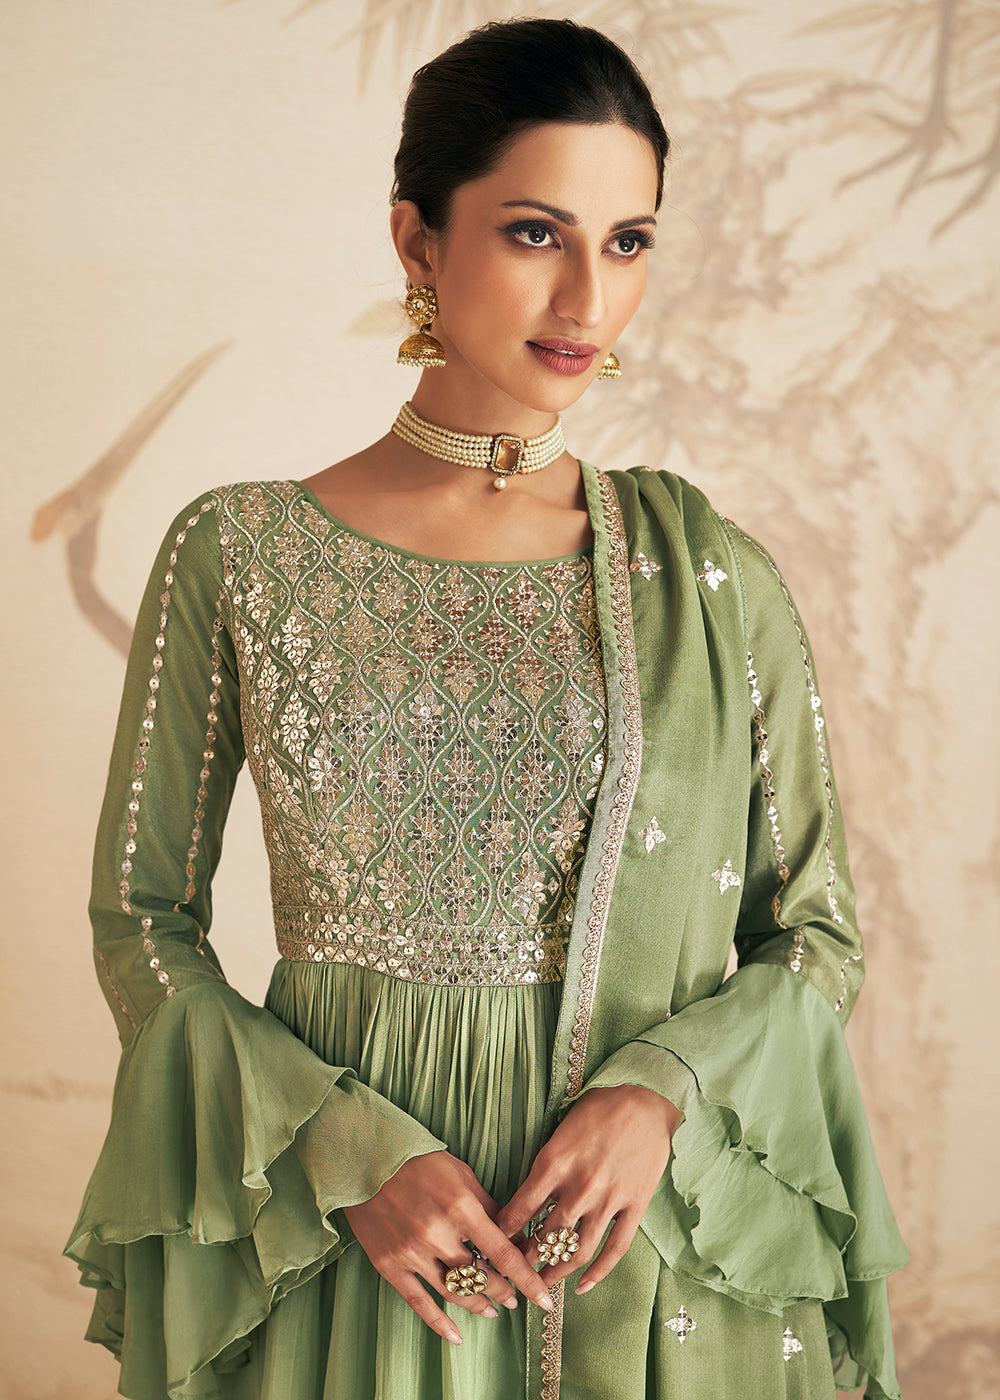 Shop Now Fern Green Thread & Sequins Embroidered Designer Sharara Suit Online at Empress Clothing in USA, UK, Canada, Germany & Worldwide. 